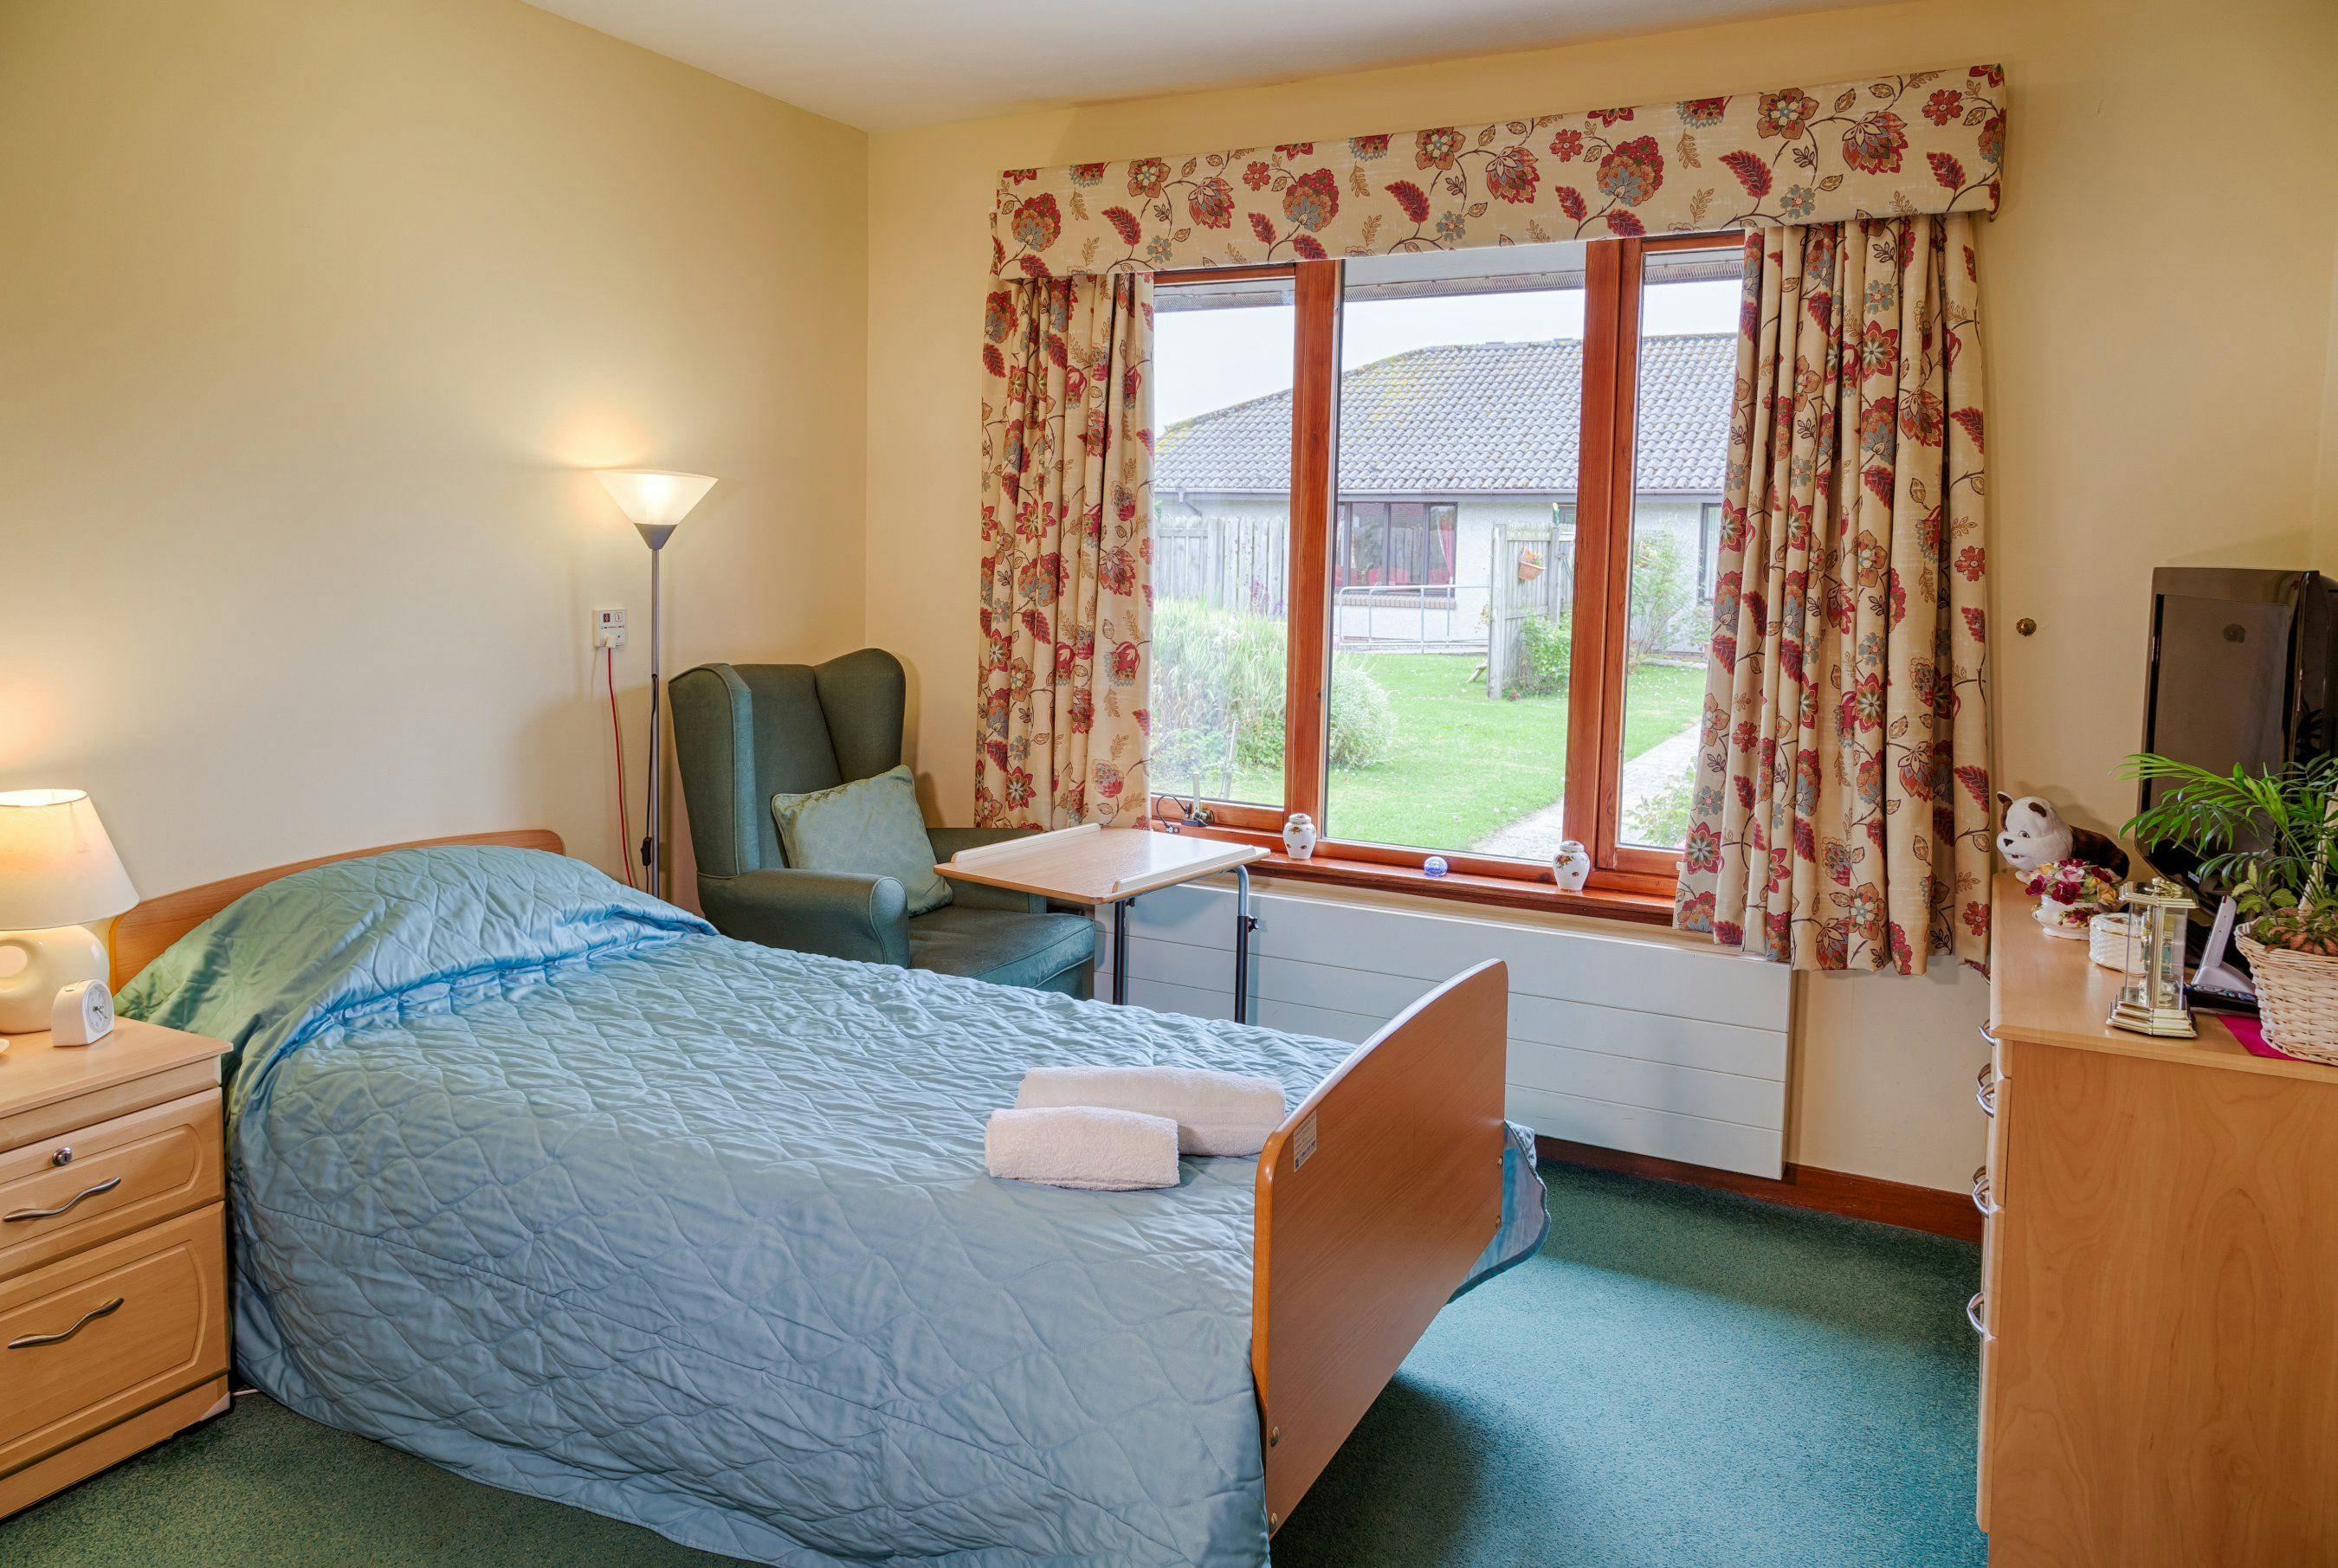 Bedroom at Pentland View Care Home in Thurso, Highland